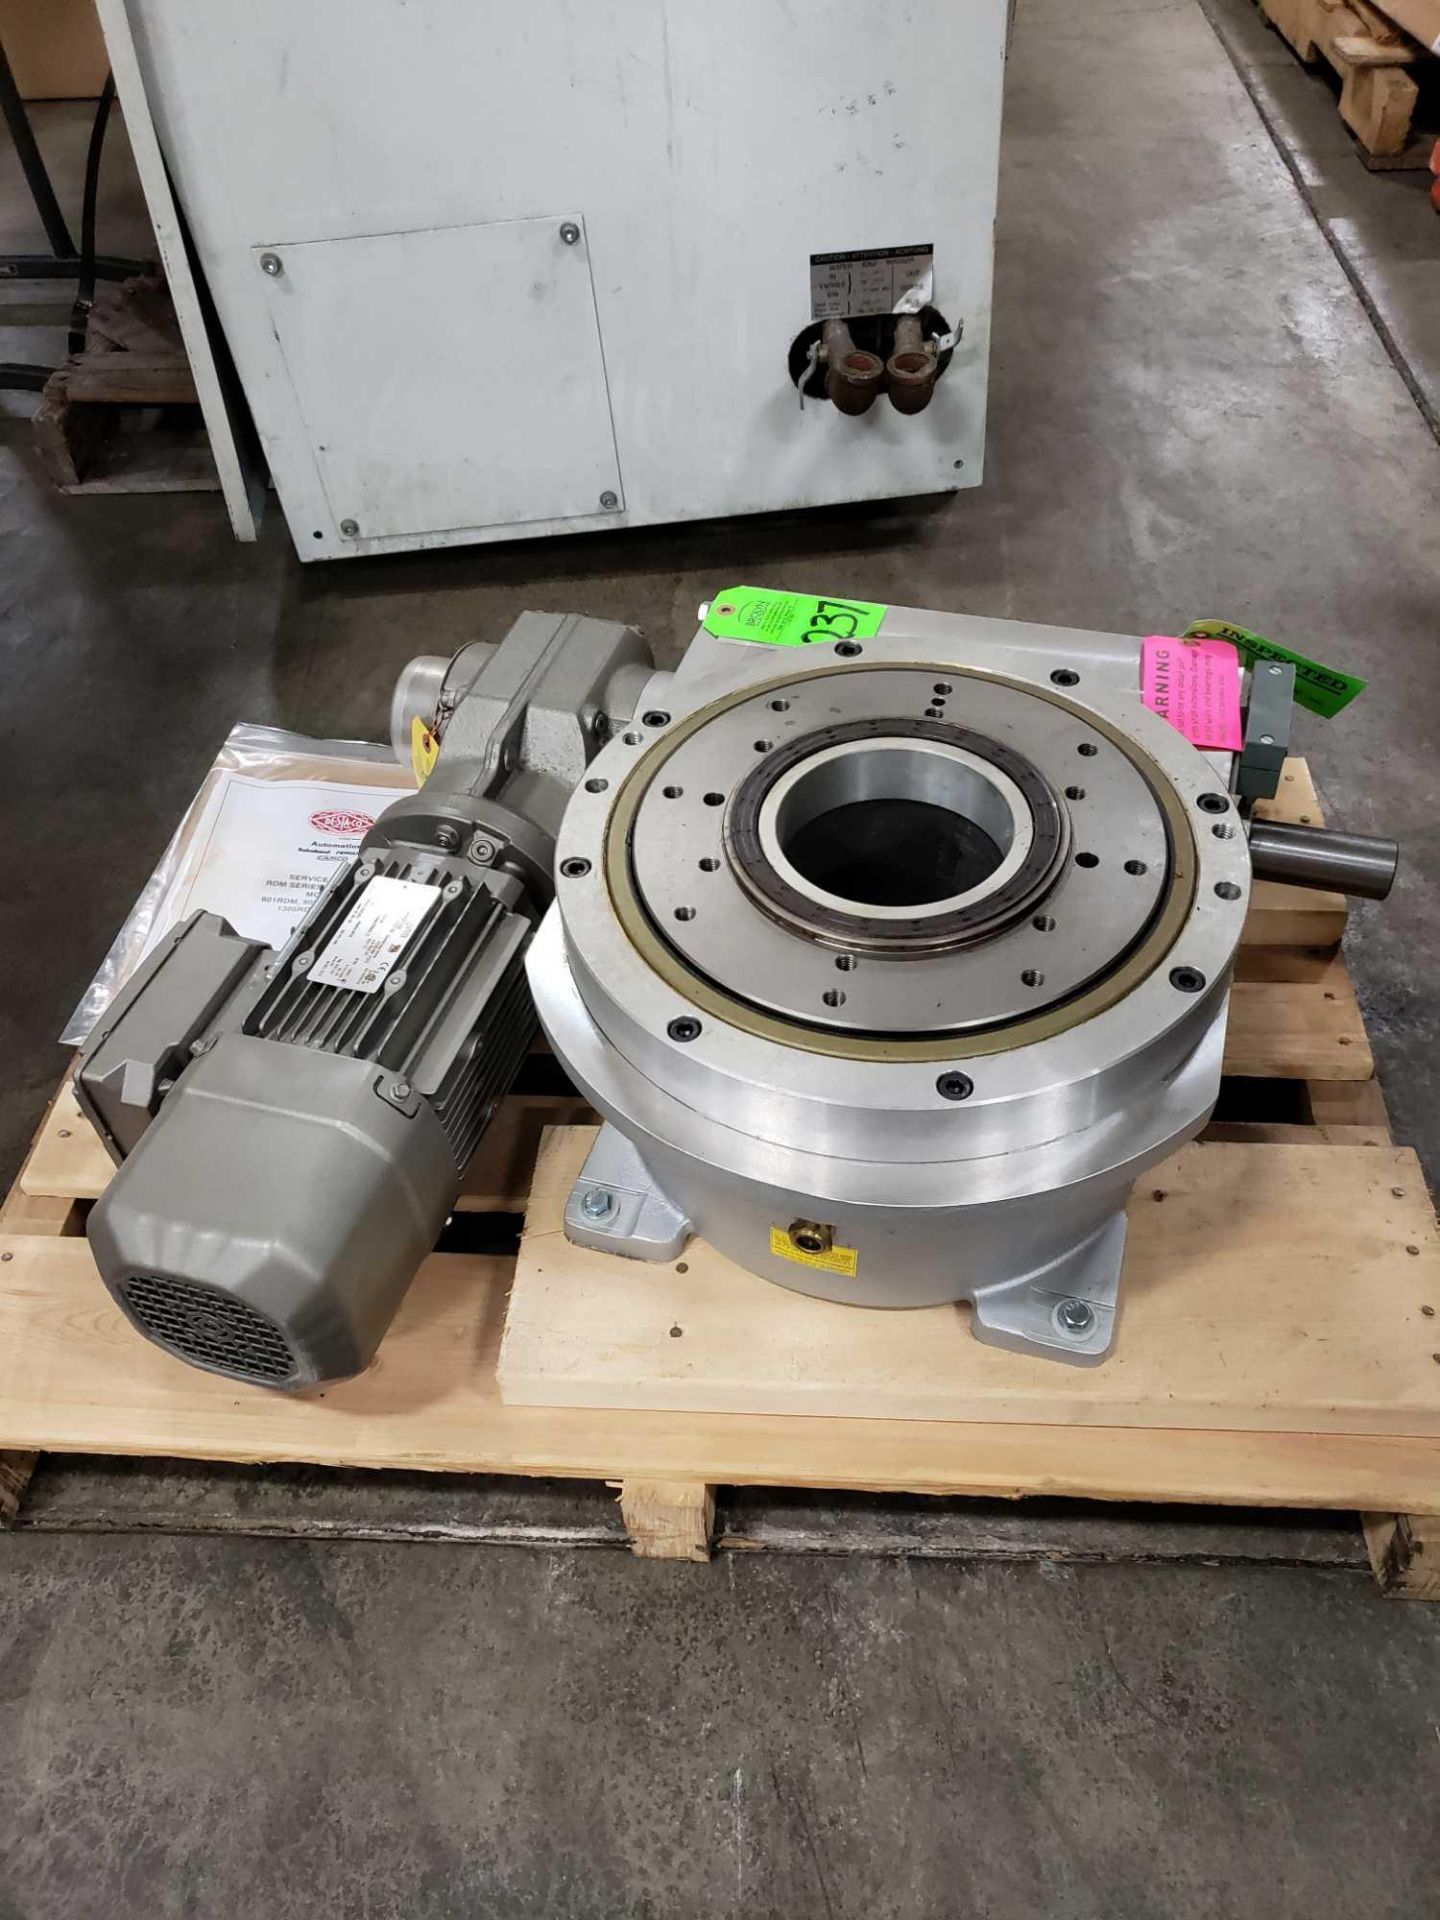 Camco model 1100RDM2H48-330 rotary positioner. New on pallet with paperwork.